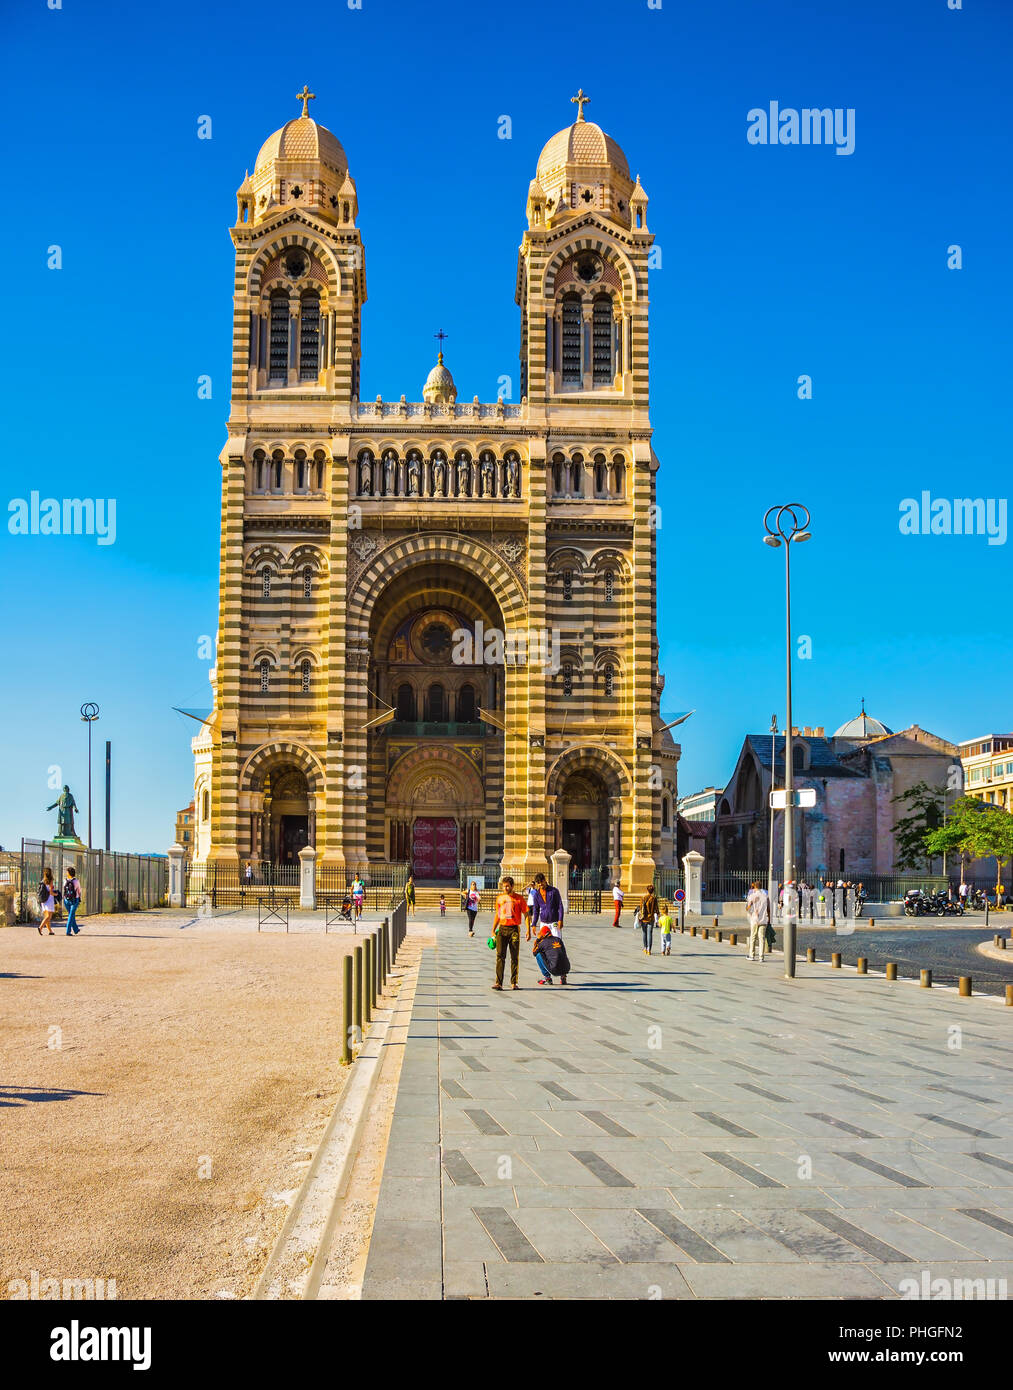 The Cathedral of Saint Mary Major Stock Photo